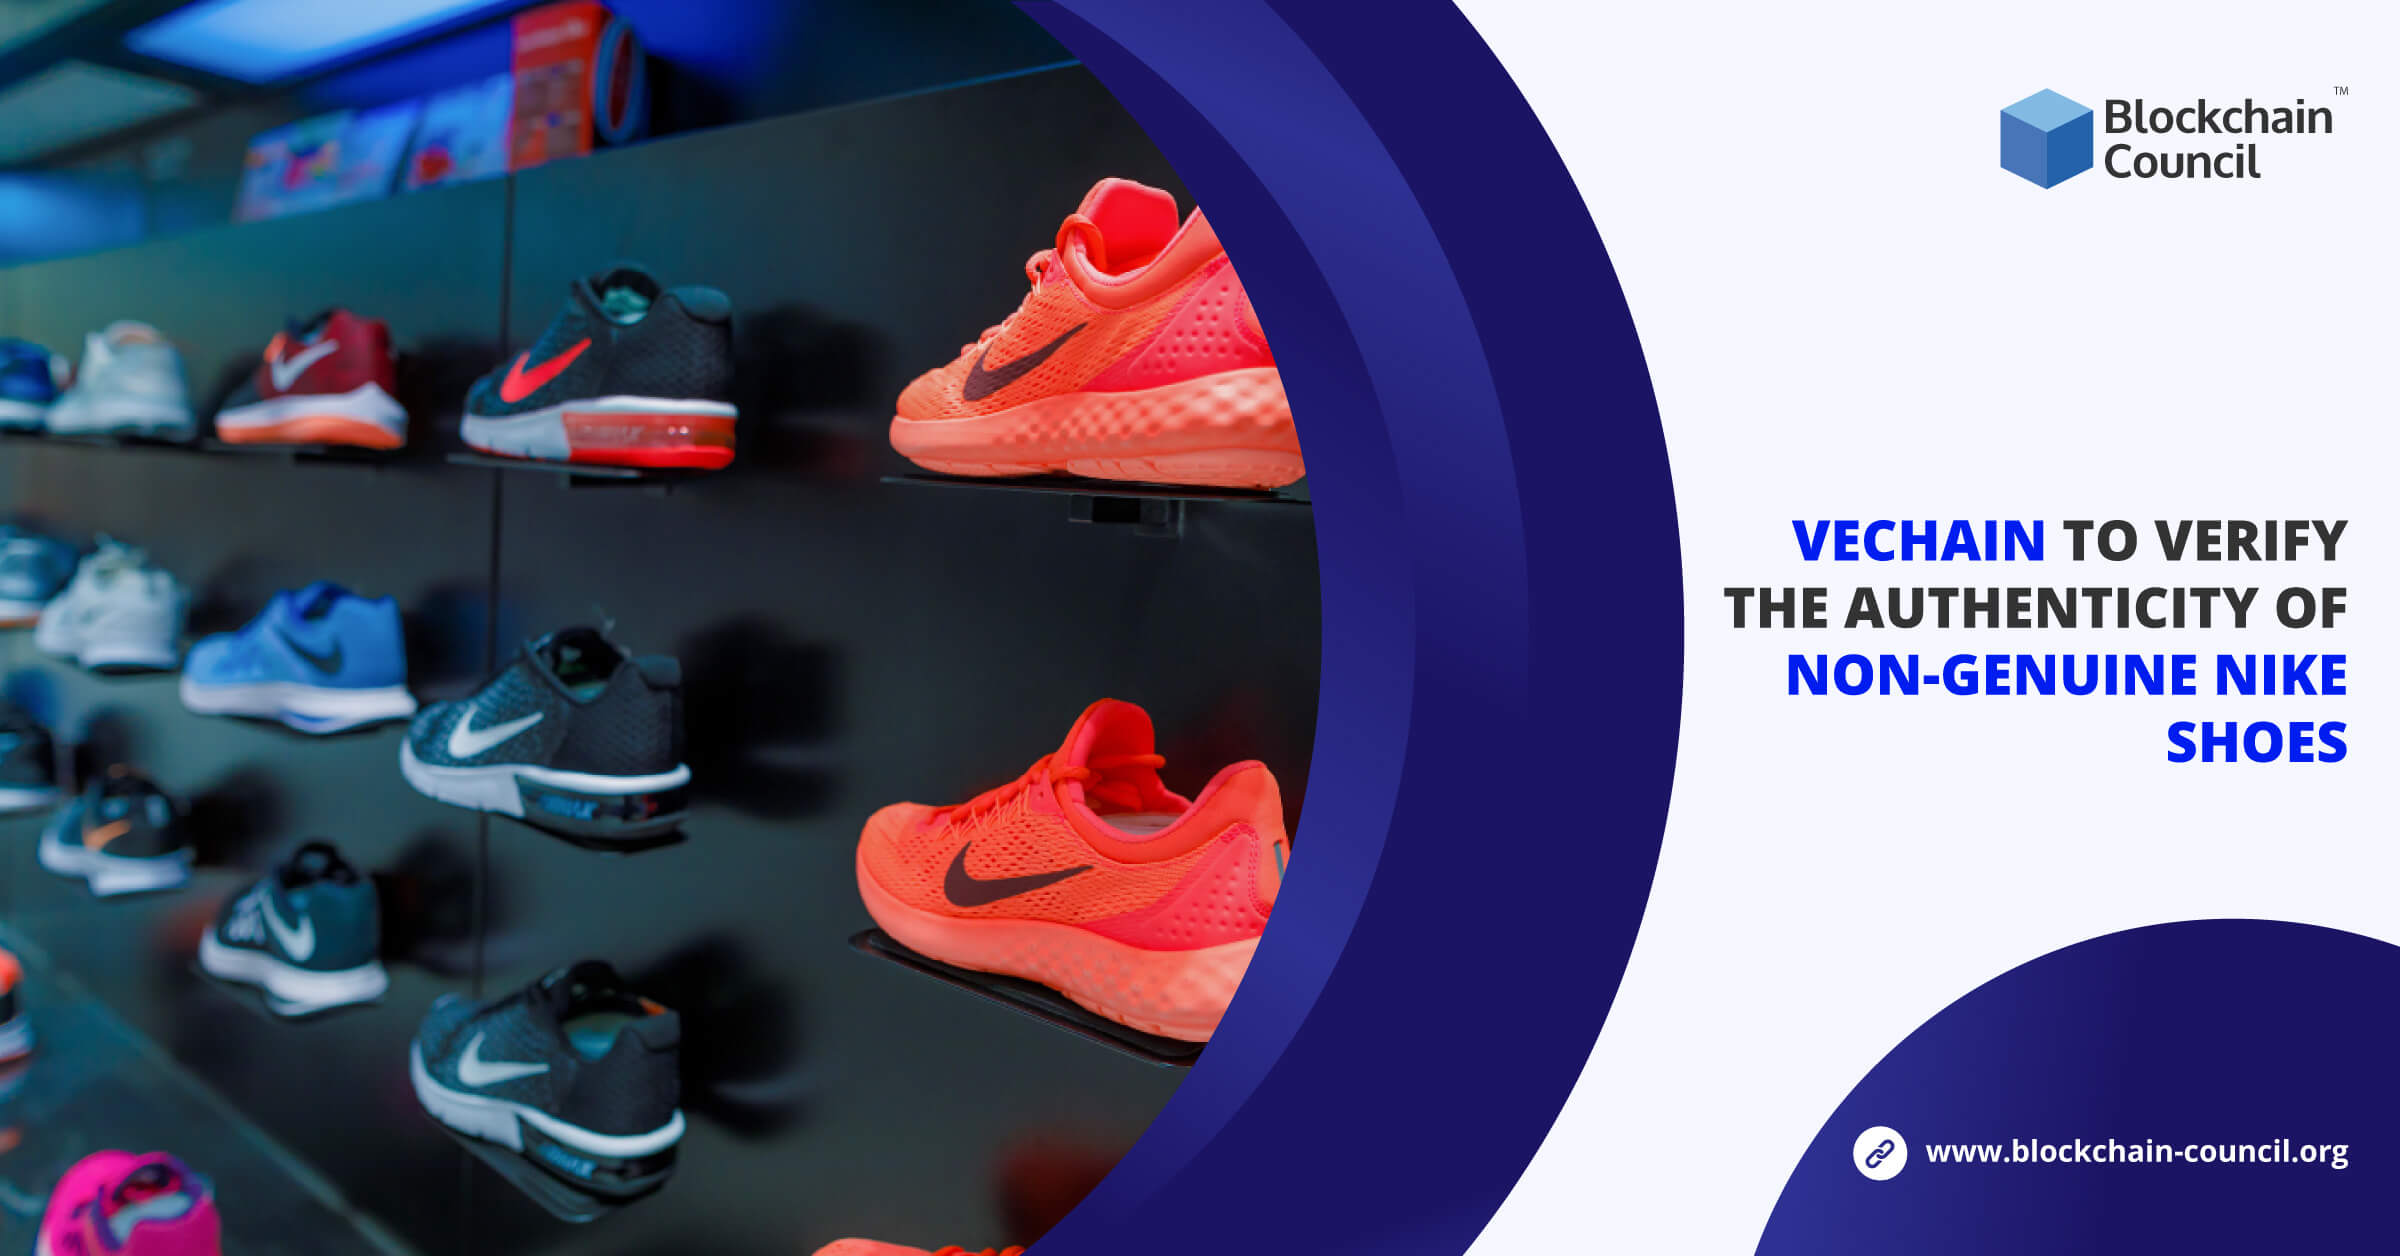  VeChain to Verify the Authenticity of Non-Genuine Nike shoes